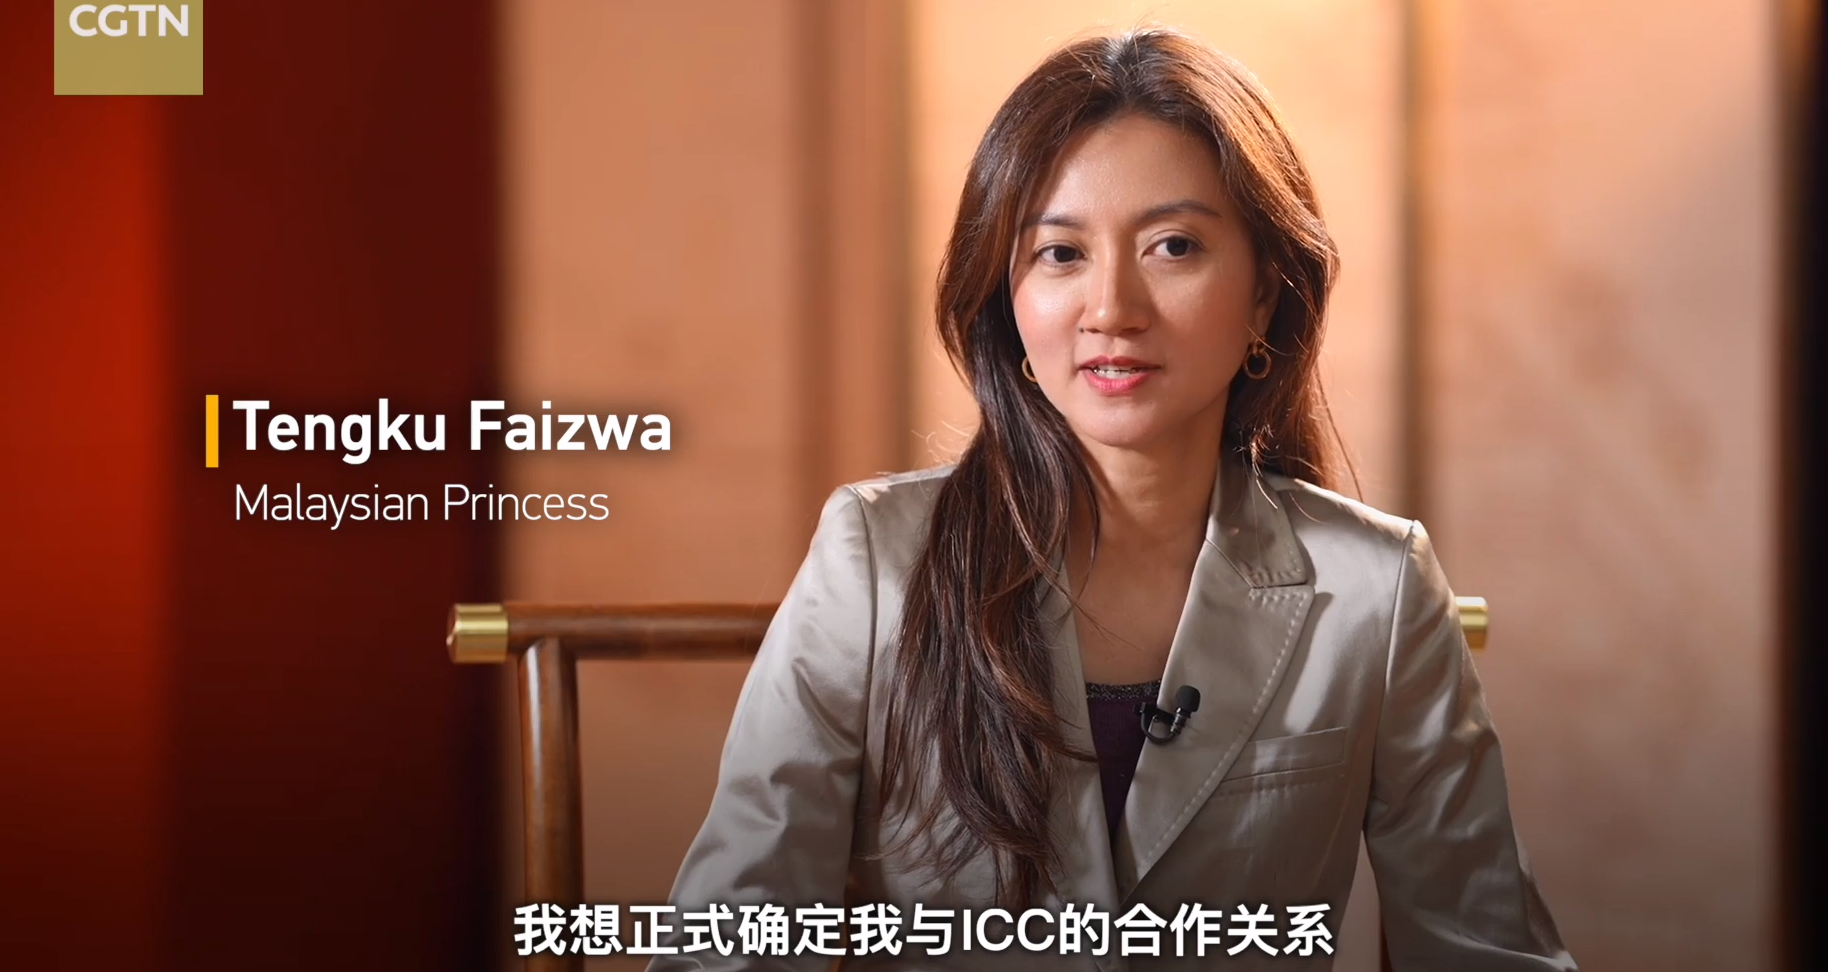 Princess Faizwa,Member of the Strategic Advisory Committee of the ICC was interviewed by CGTN 